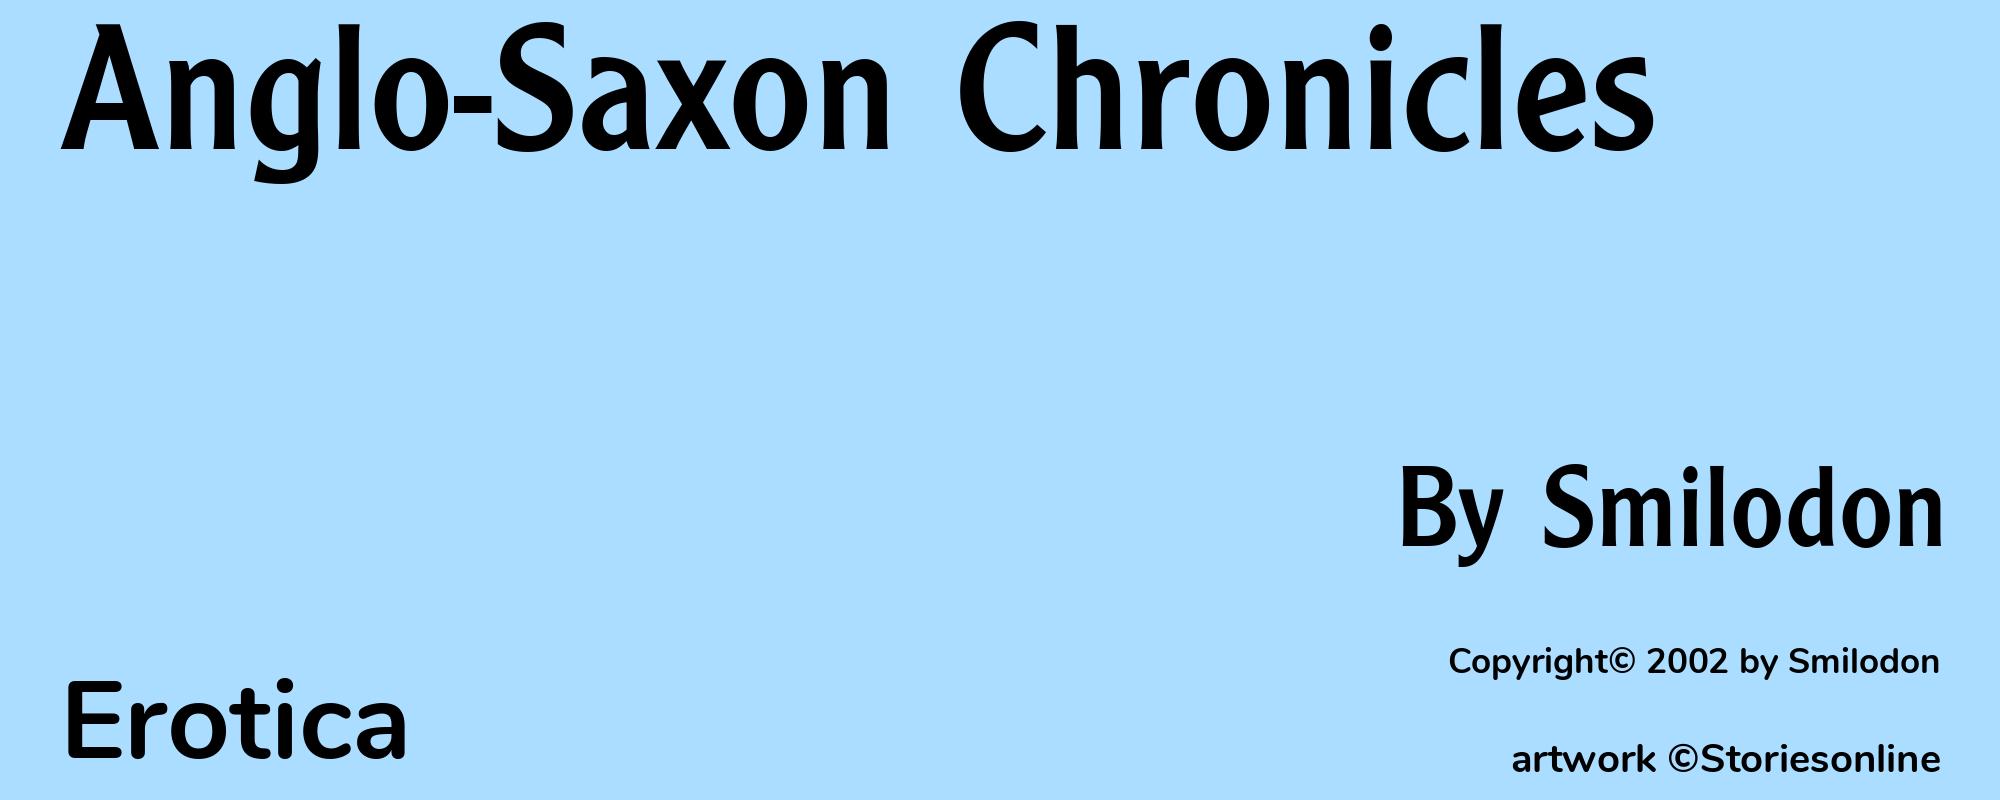 Anglo-Saxon Chronicles - Cover